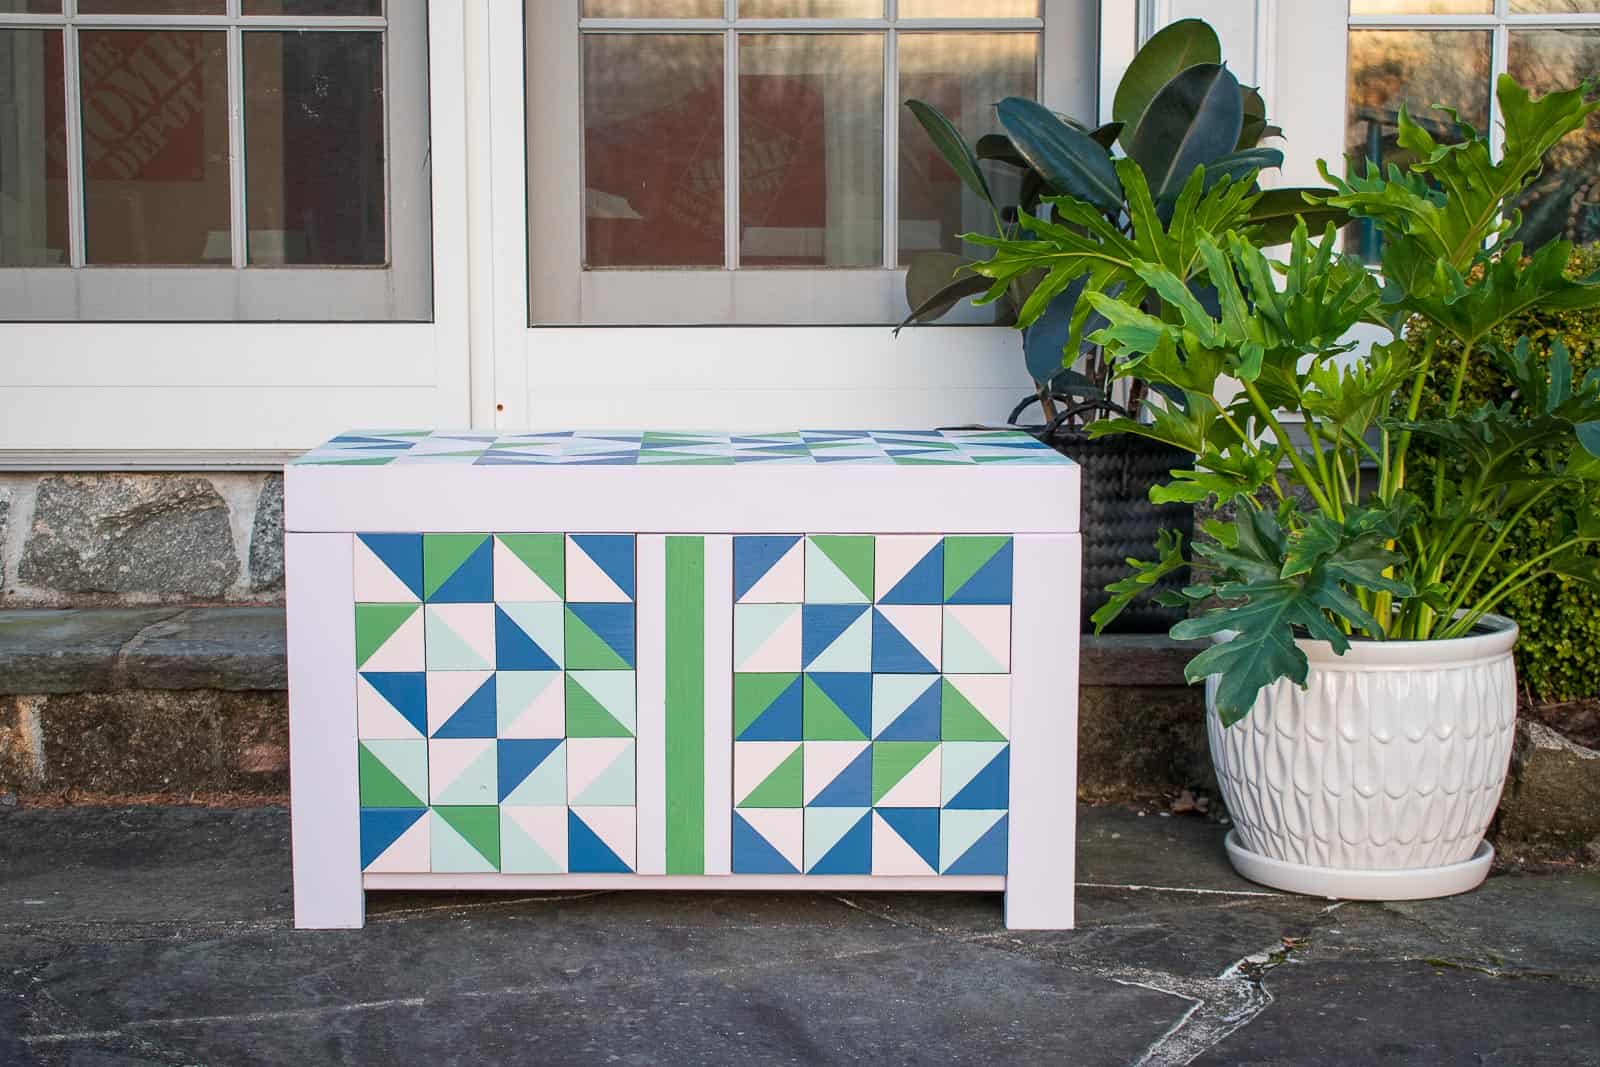 How to Build a Colorful Wooden Cooler Box - At Charlotte's House